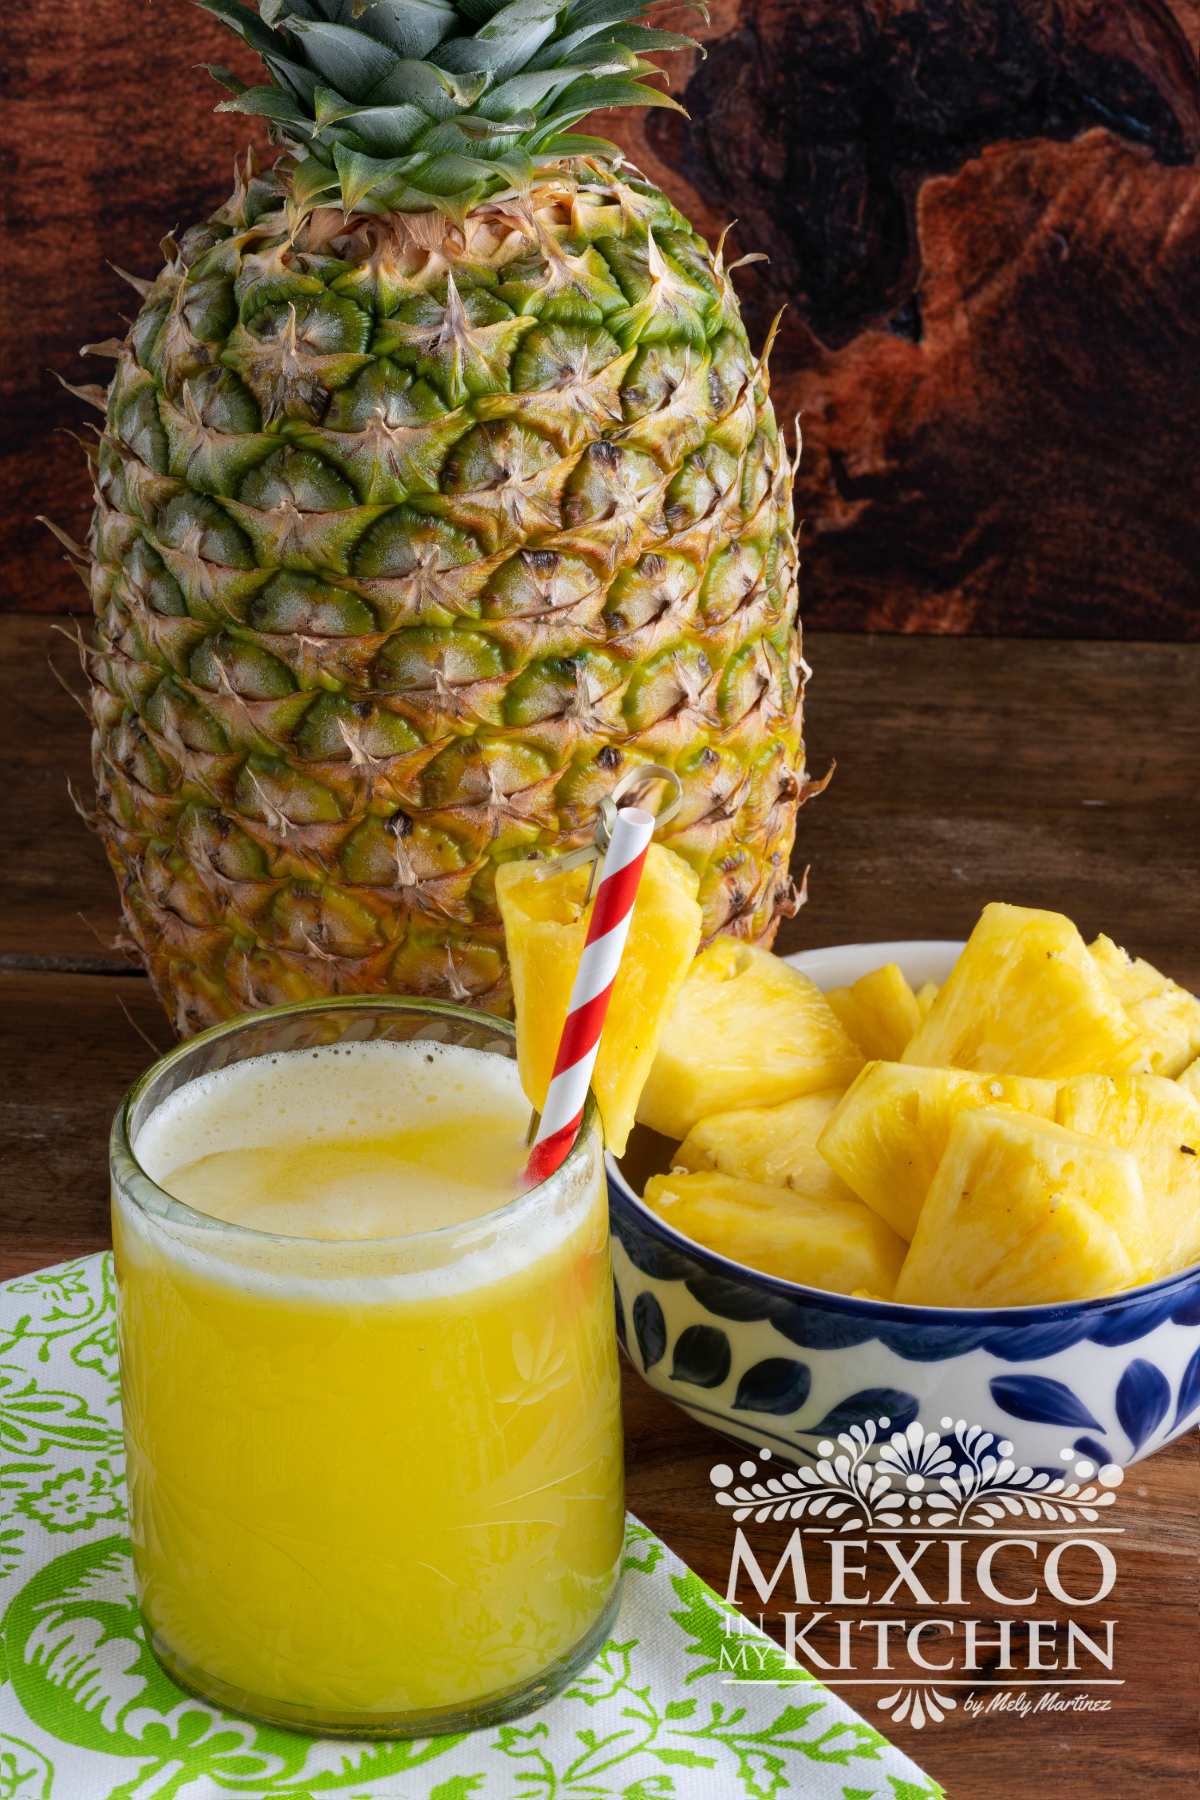 Agua de piña served in a glass next to a pineapple and a bowl of pineapple chunks.